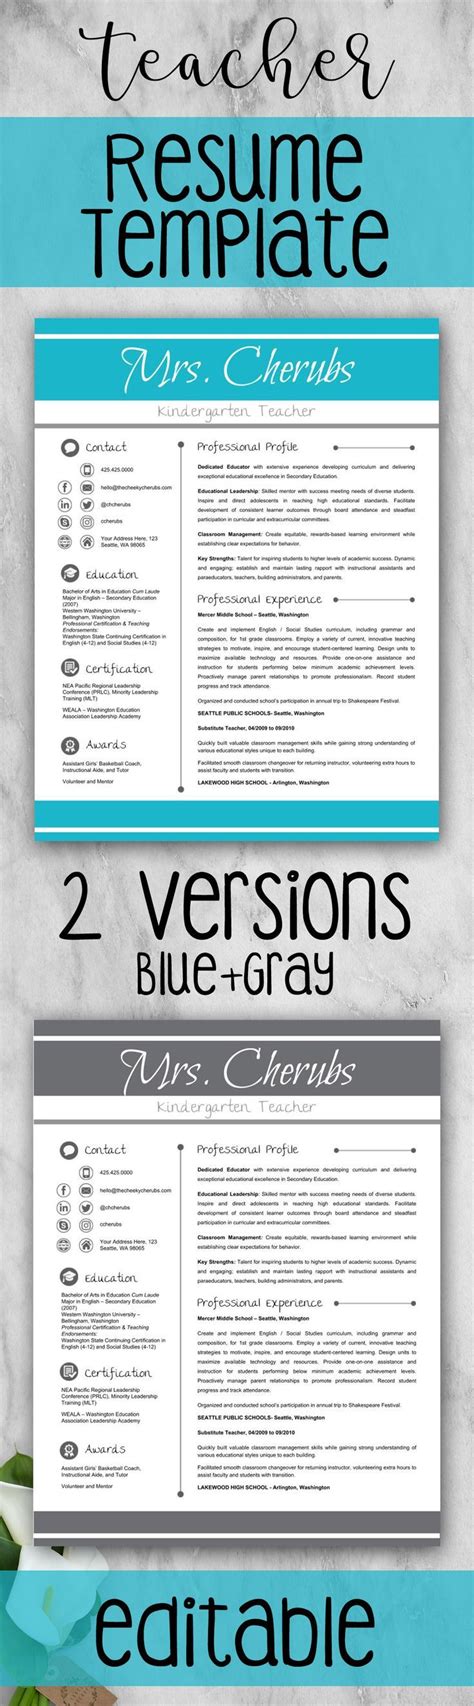 Resume Template With 2x2 Picture Free Resume Ideas